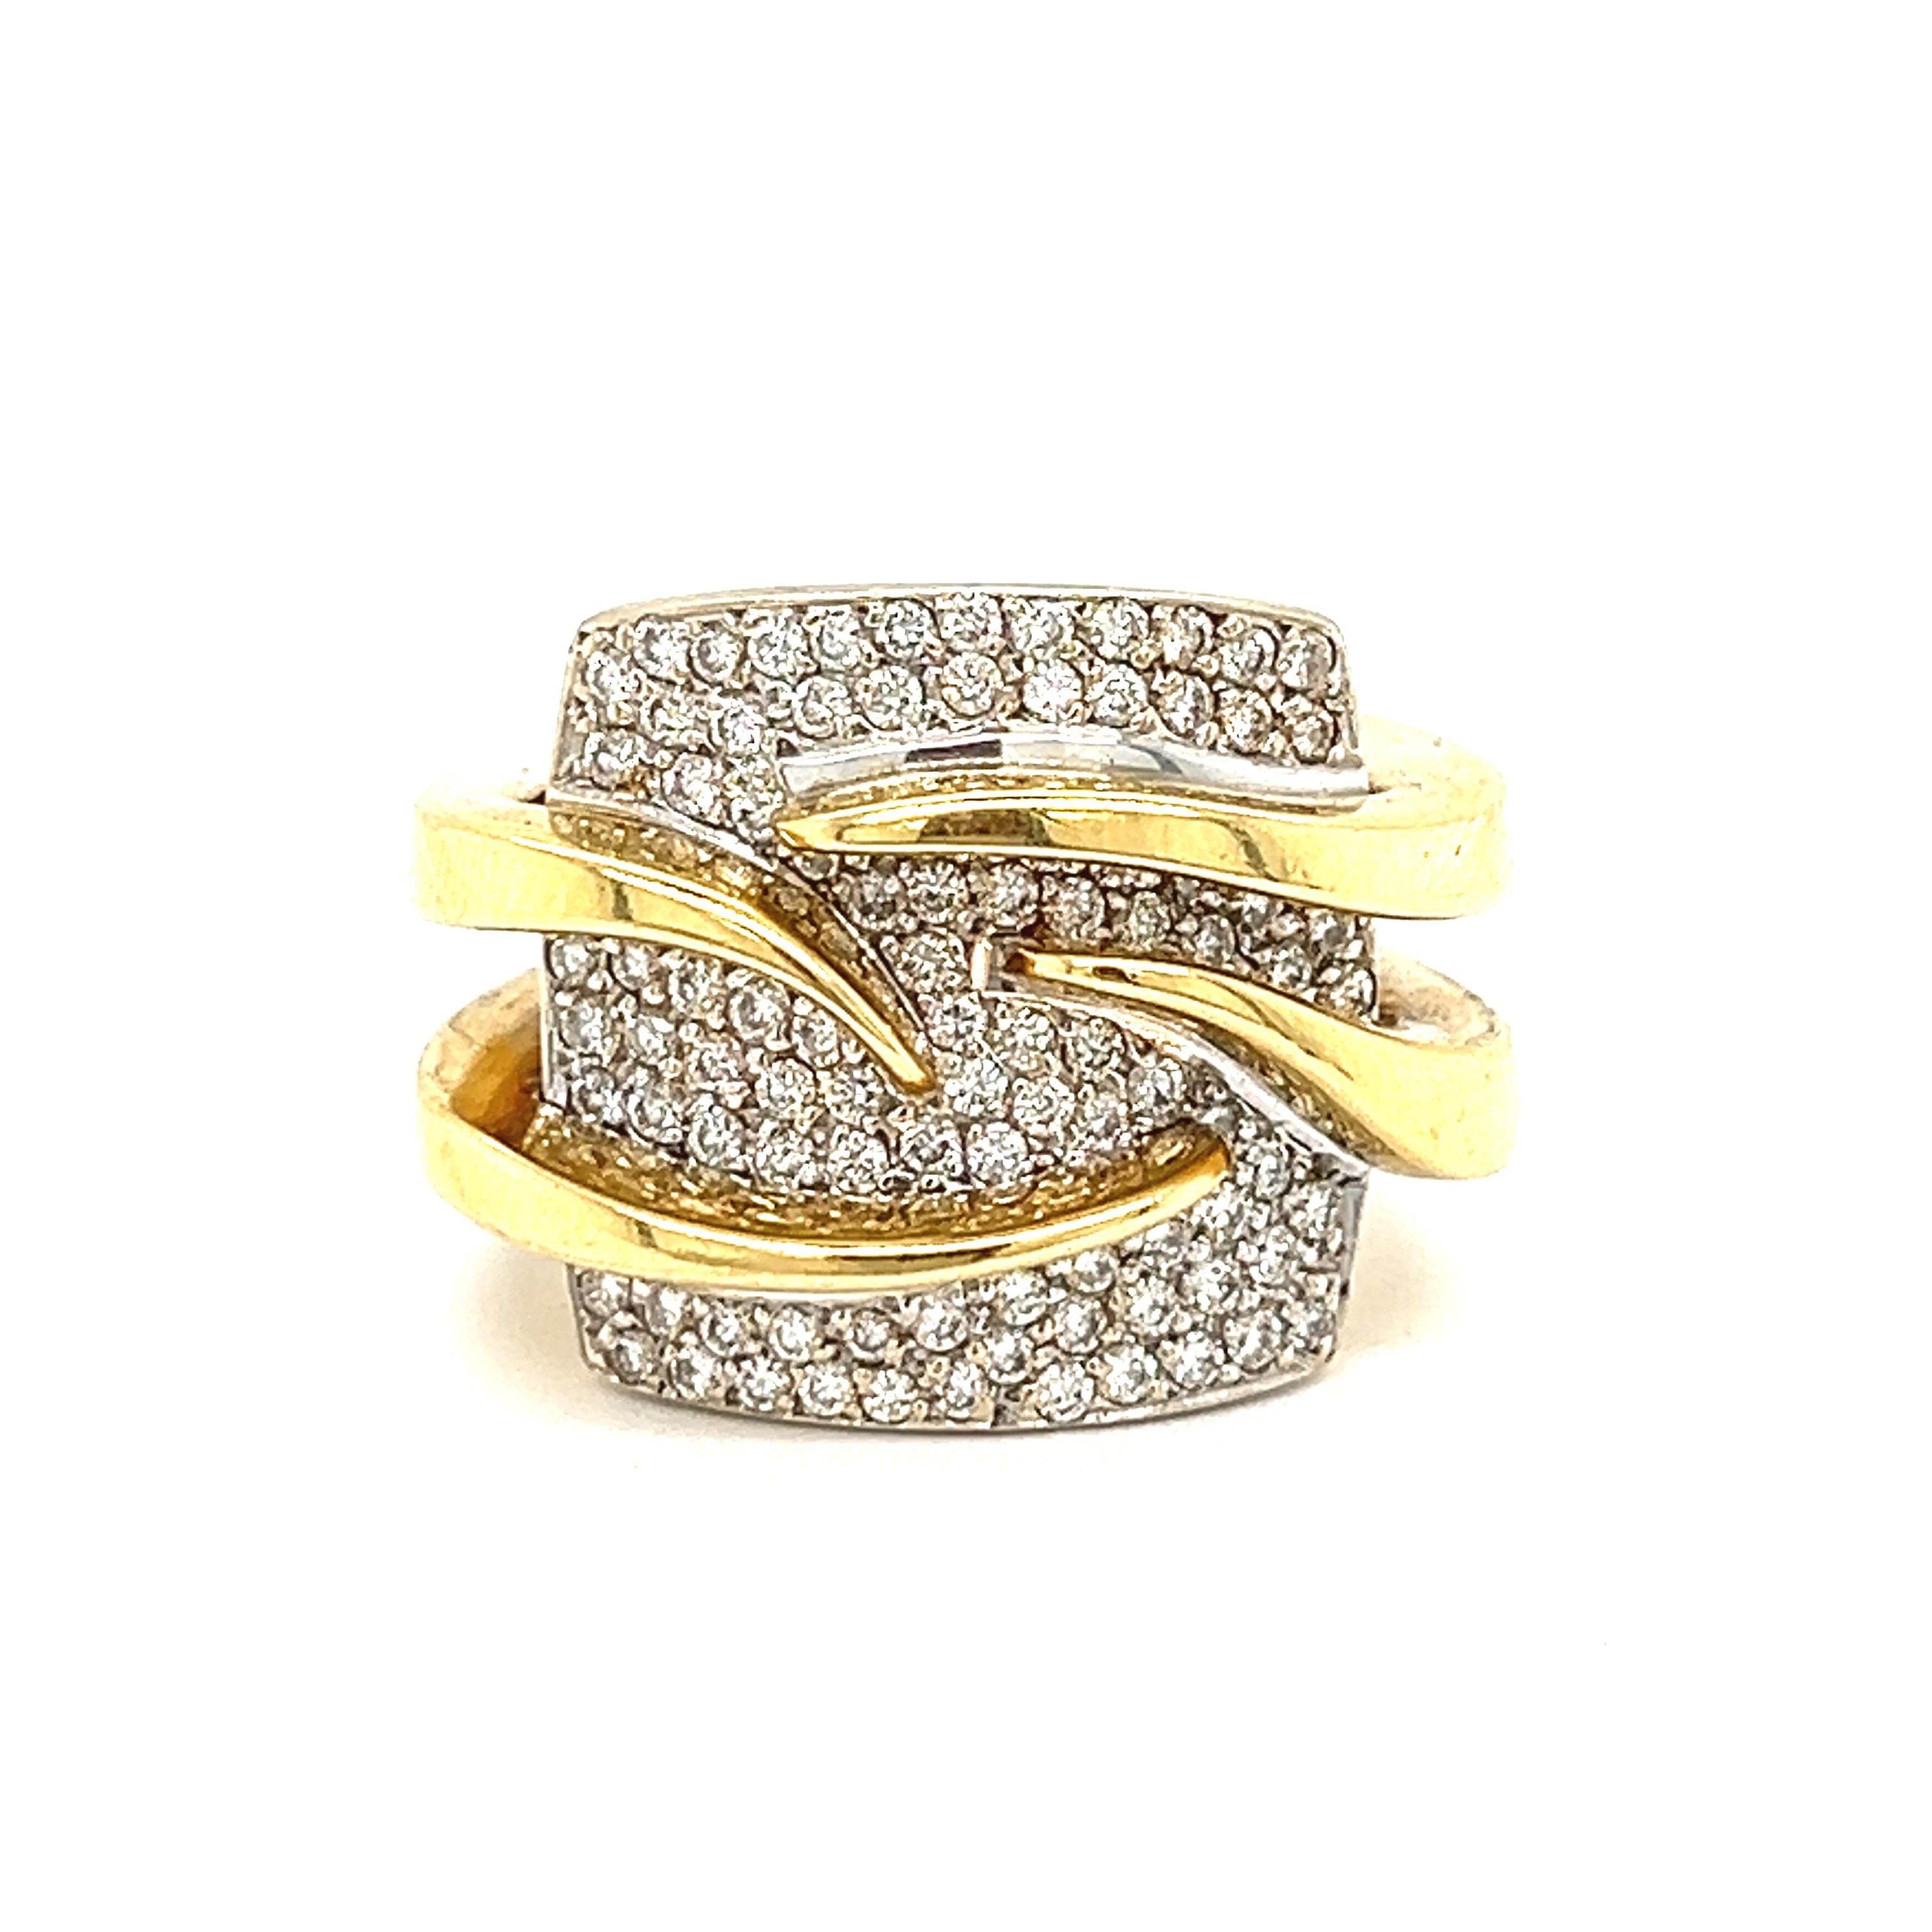 This  2 ct Diamond and 18k gold Vintage Ring is a one-of-a-kind. An intricate weaved design with over 2 carats of diamonds set in 18k gold makes it a bold addition to your look.